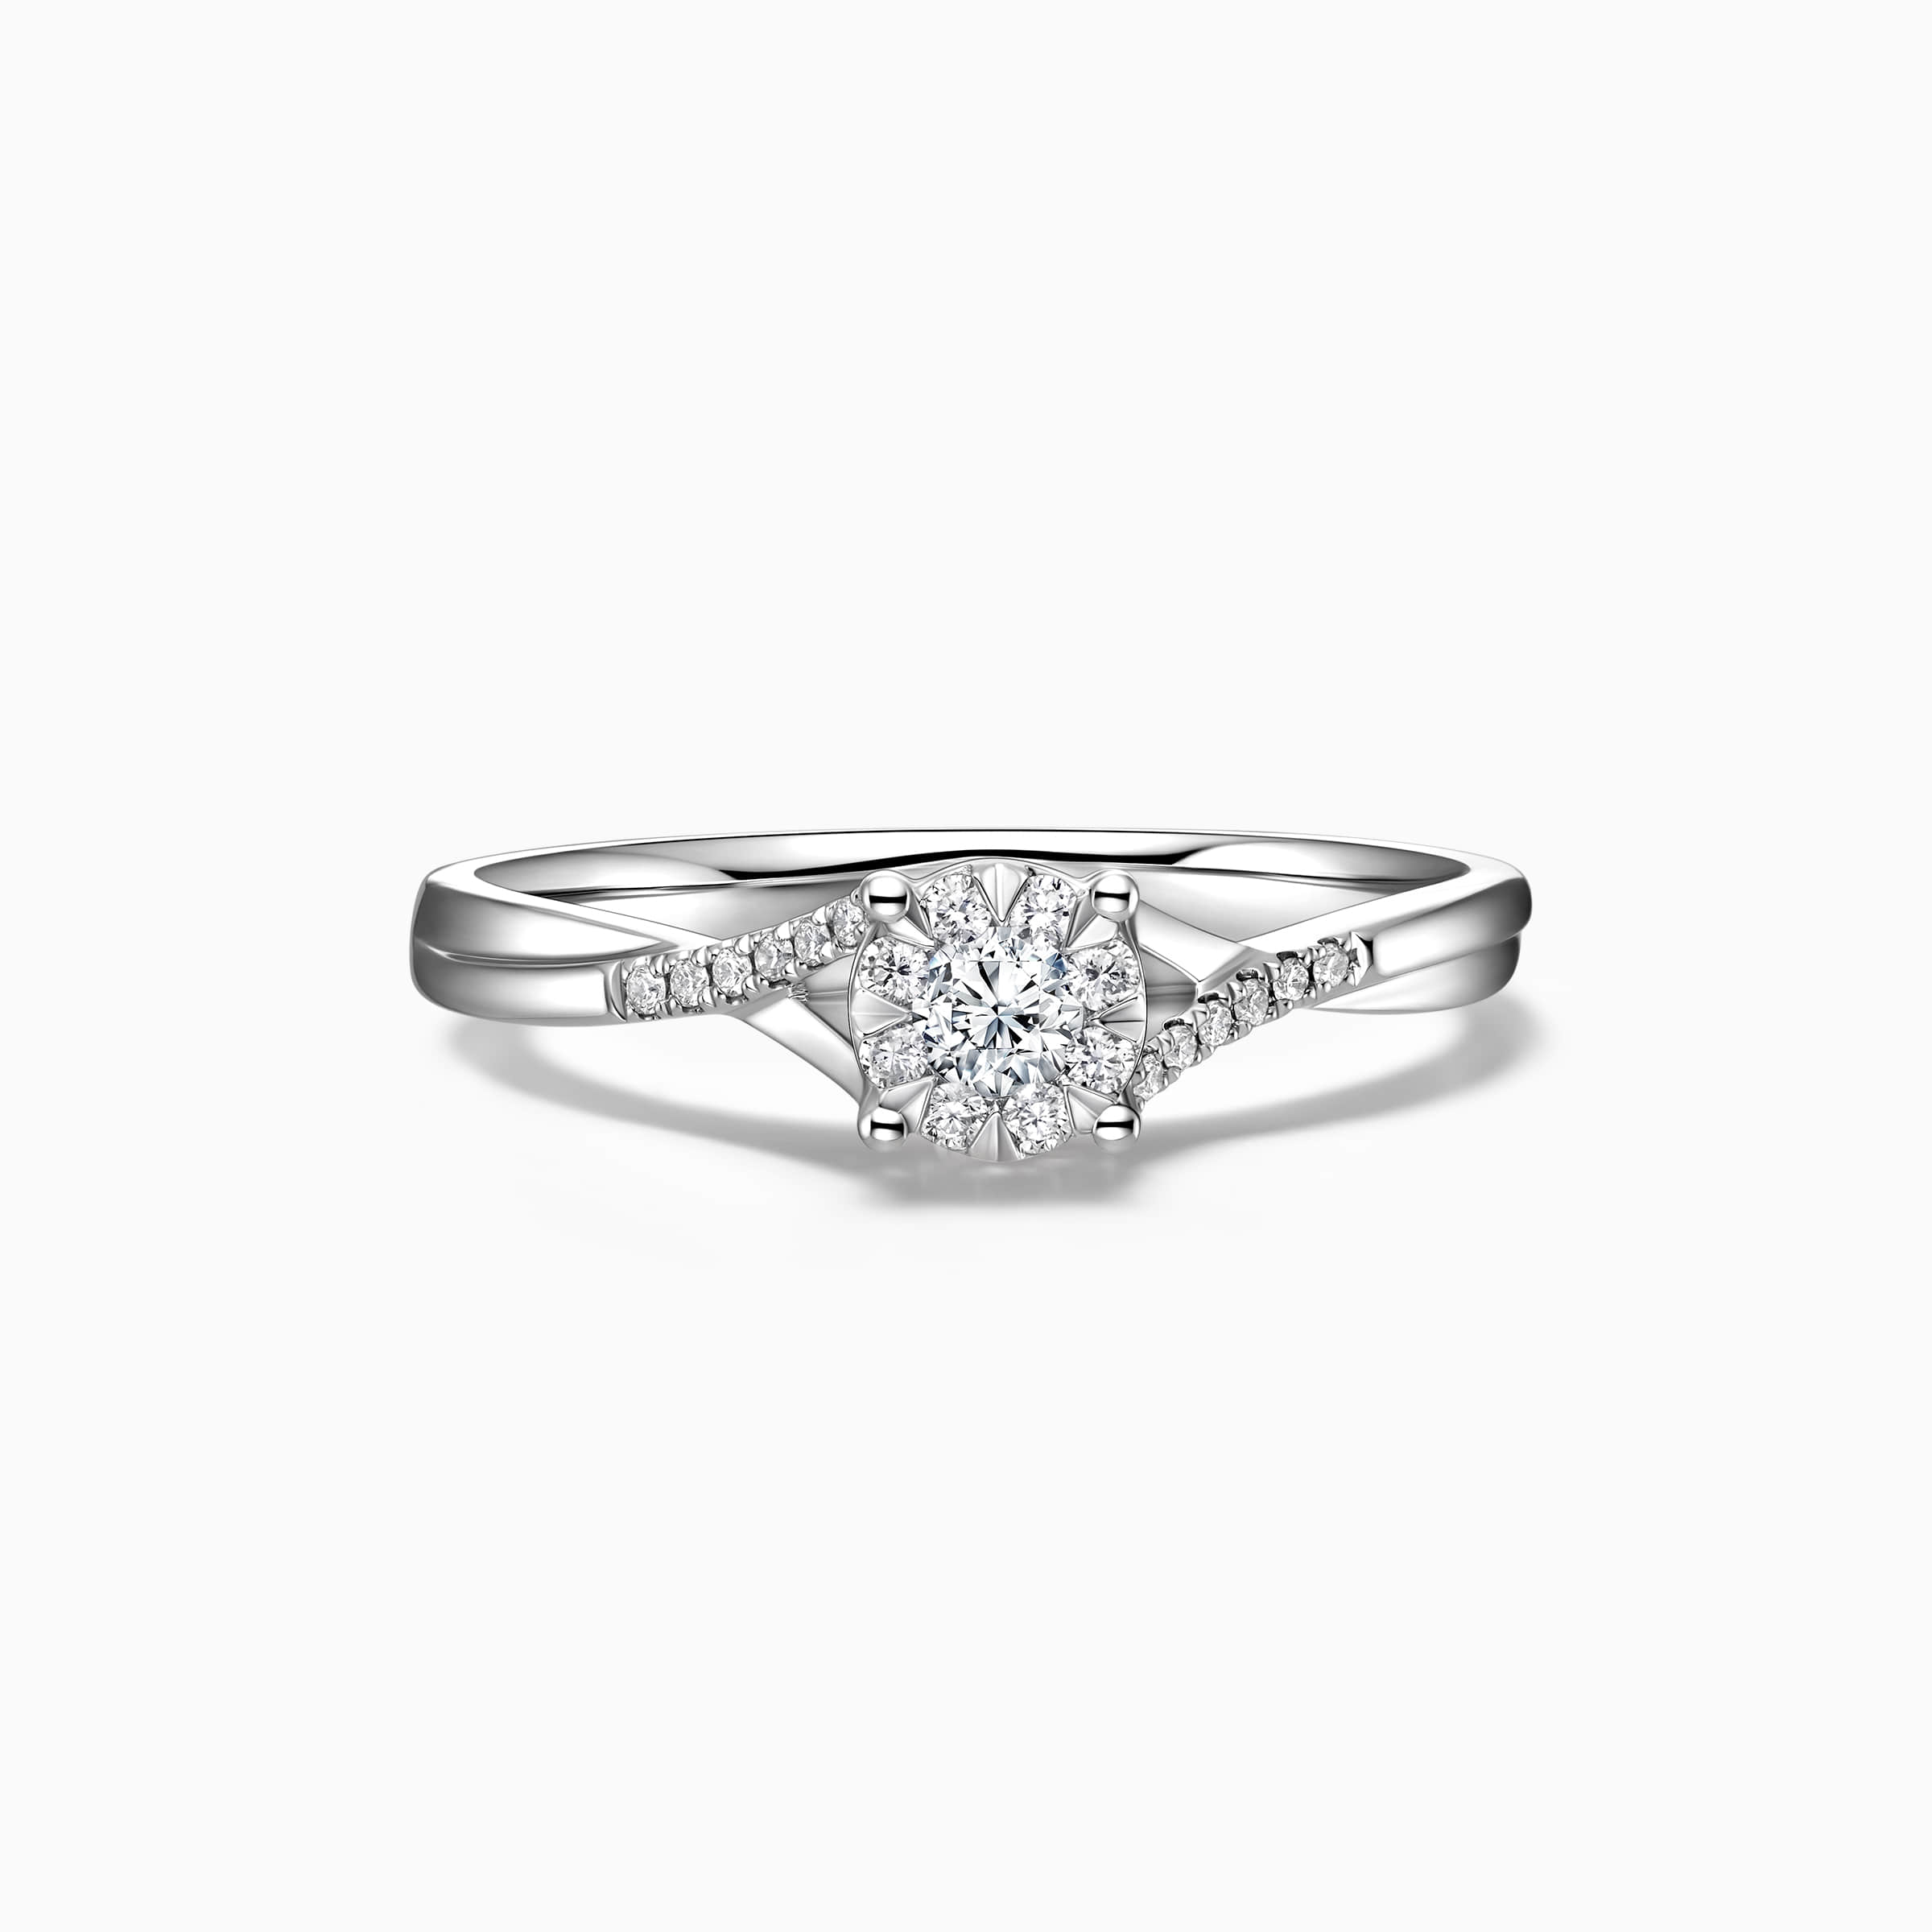 Darry Ring dainty halo promise ring in platinum